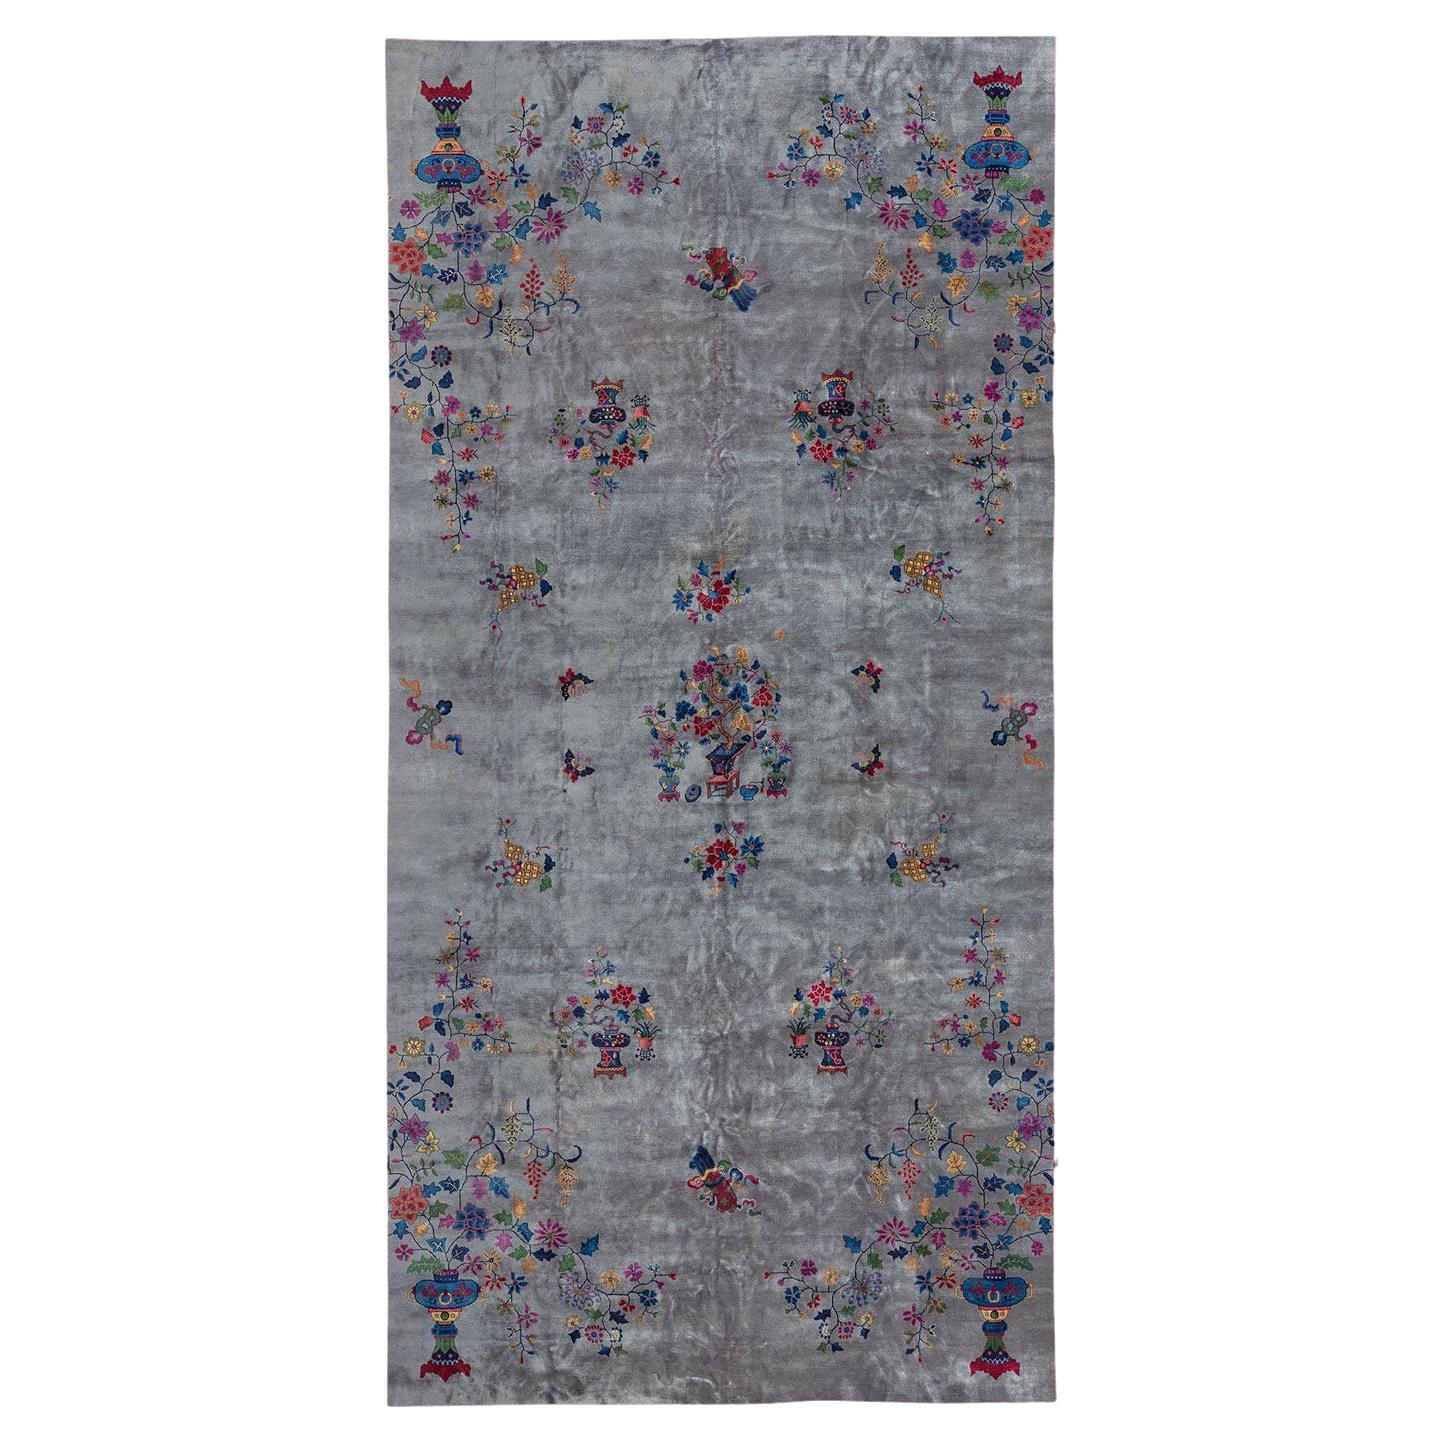 Stunning large Chinese Art Deco rug with a beautiful floral design on a grey field and plum border.

Most found in Room size formats in the 8 x 10, 9 x 12 size range, this one is close to 13 x 23 feet.

Measures: 13'2